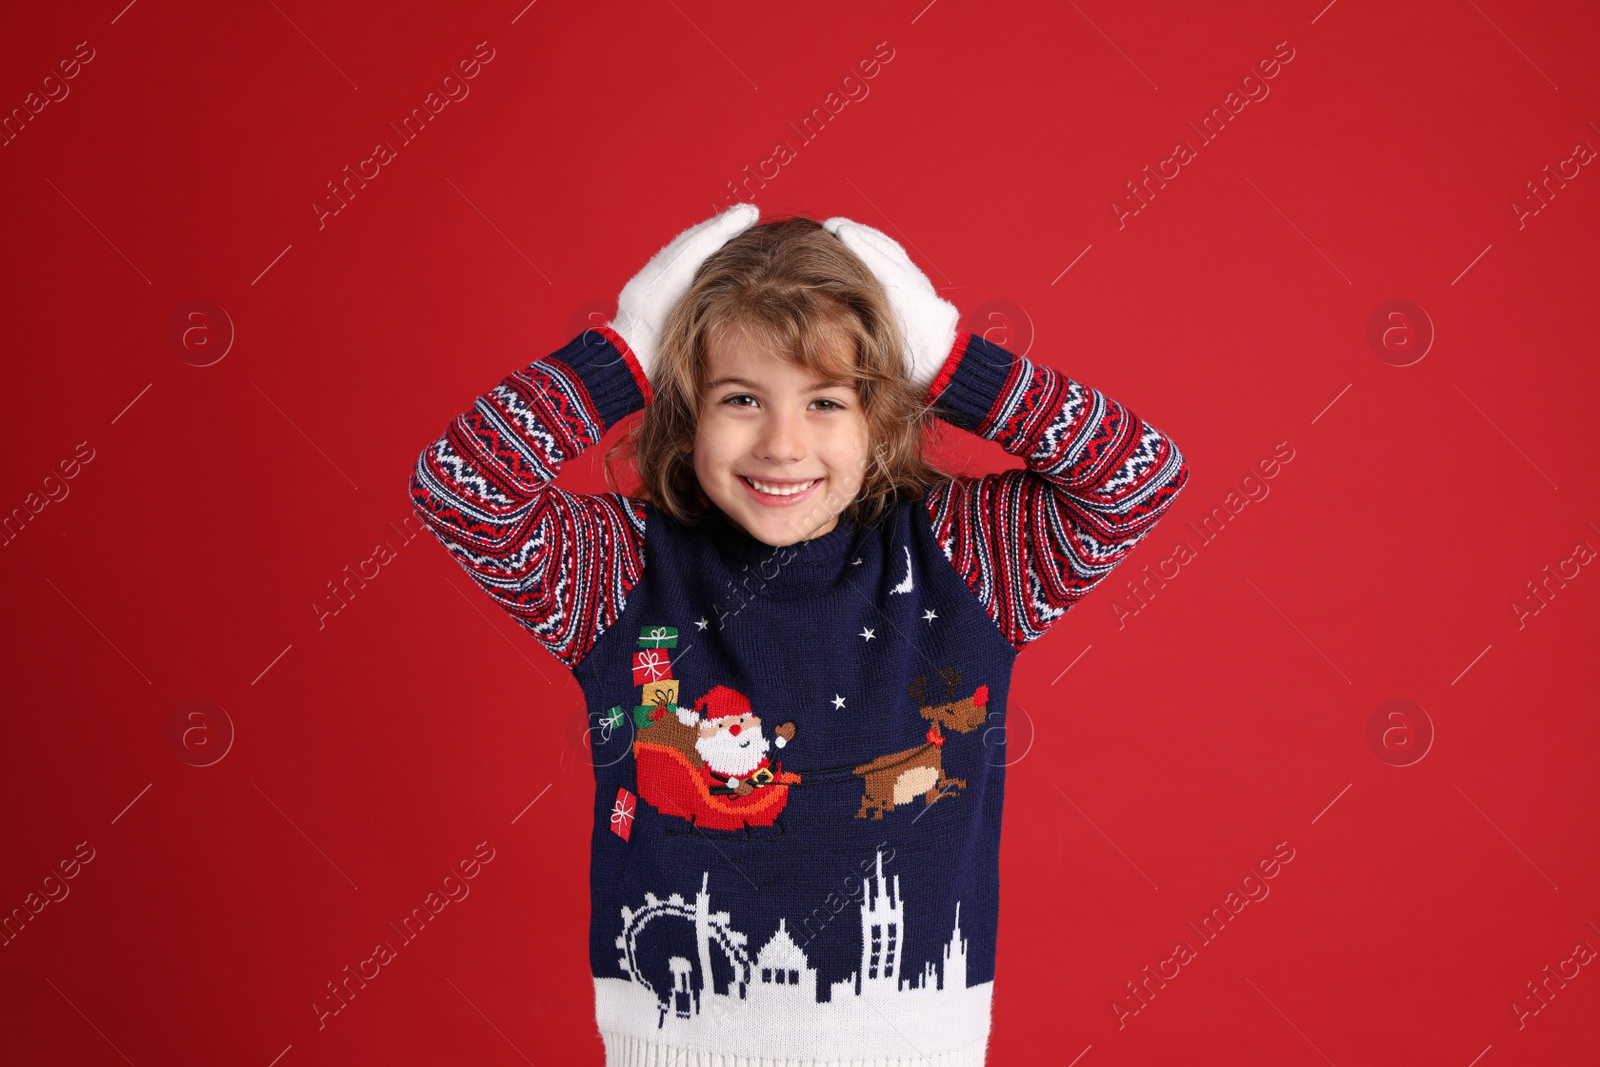 Photo of Cute little girl in Christmas sweater smiling against red background